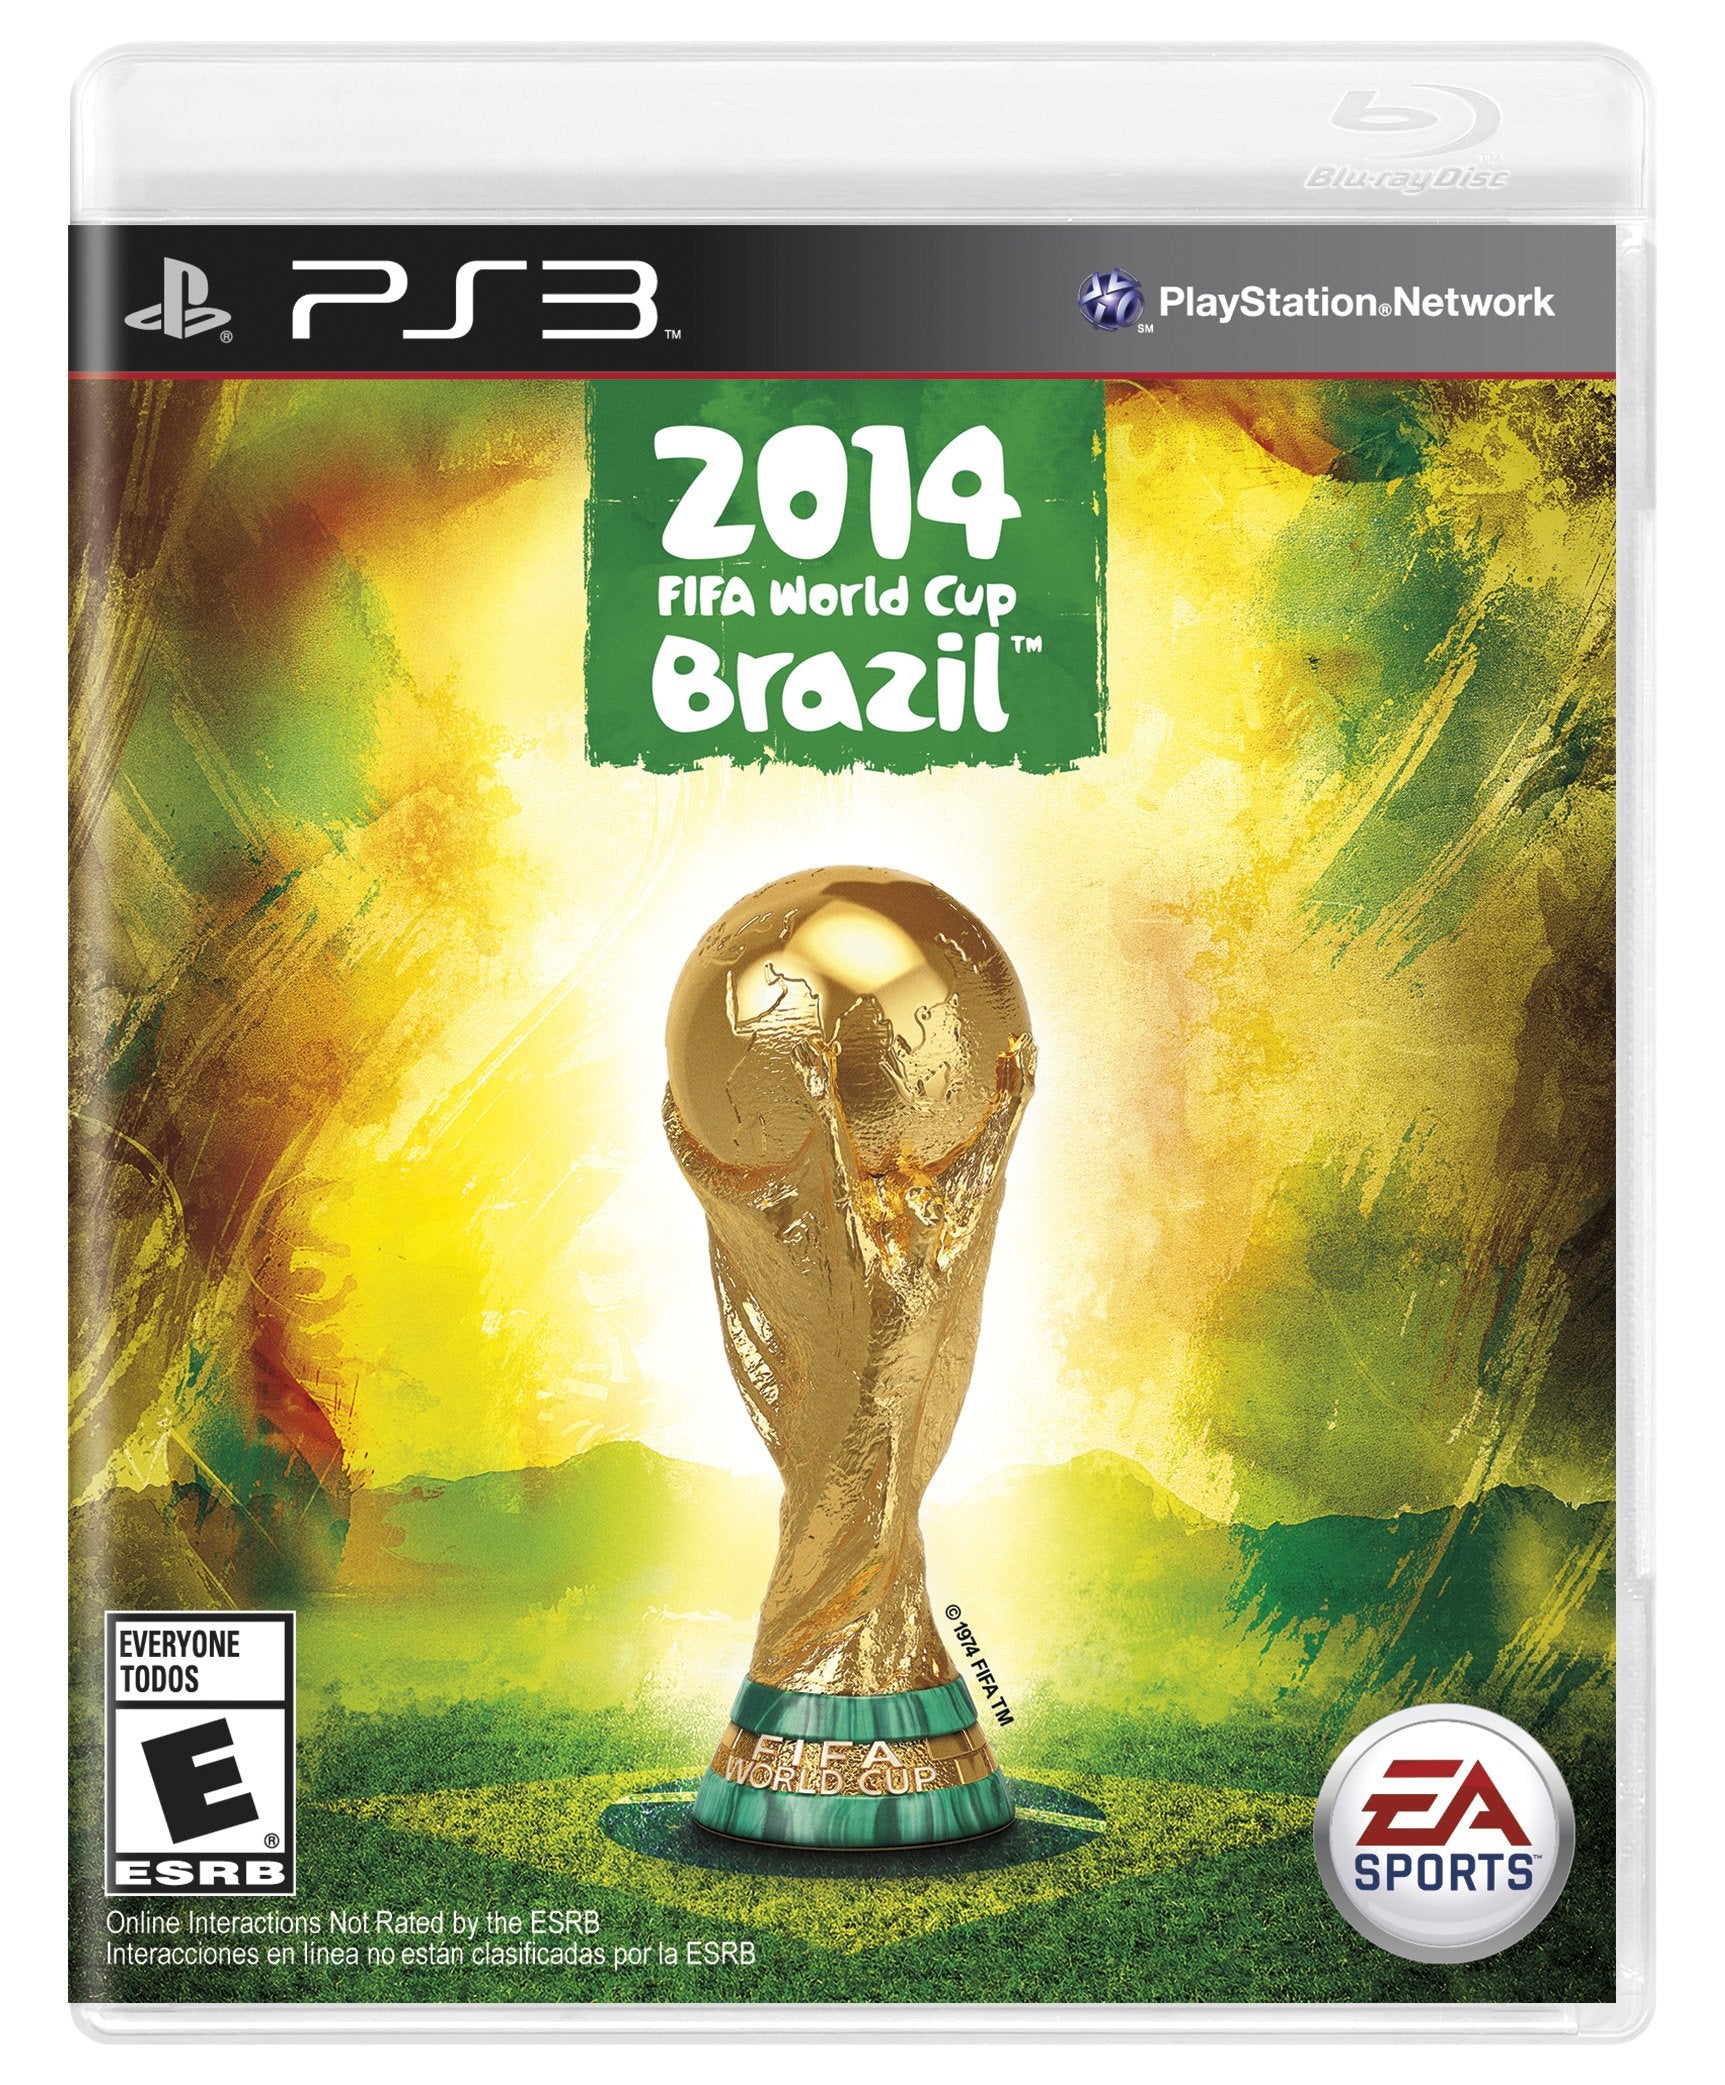 2014 FIFA World Cup Brazil - Sony PlayStation 3 (PS3)